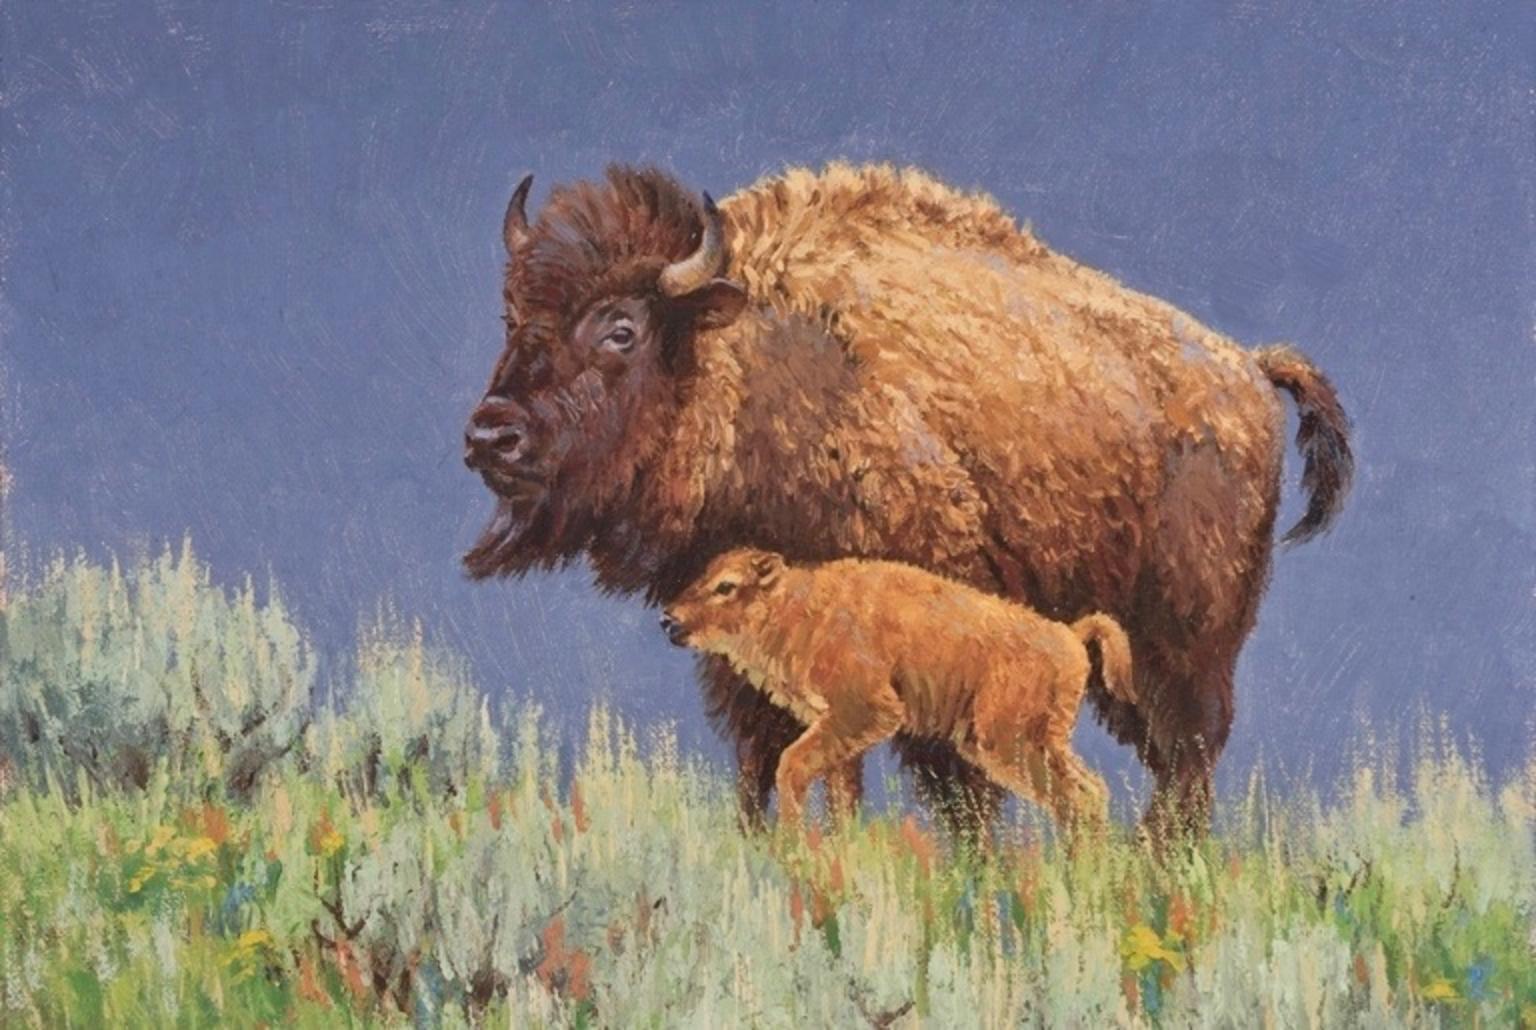 "Many-Drums Moon," an original oil painting by John Potter. As an indigenous artist, Potter, like Red Elk, celebrates all life forms. To see more of his work, go to johnpotterstudio.com